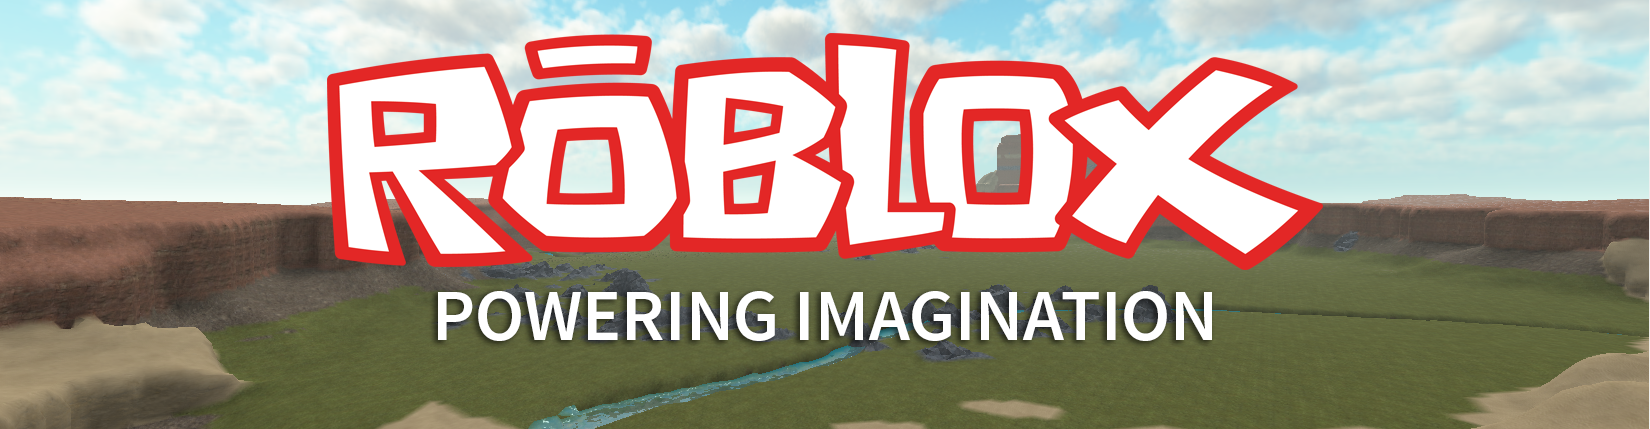 Looking Forward To 2016 Roblox Blog